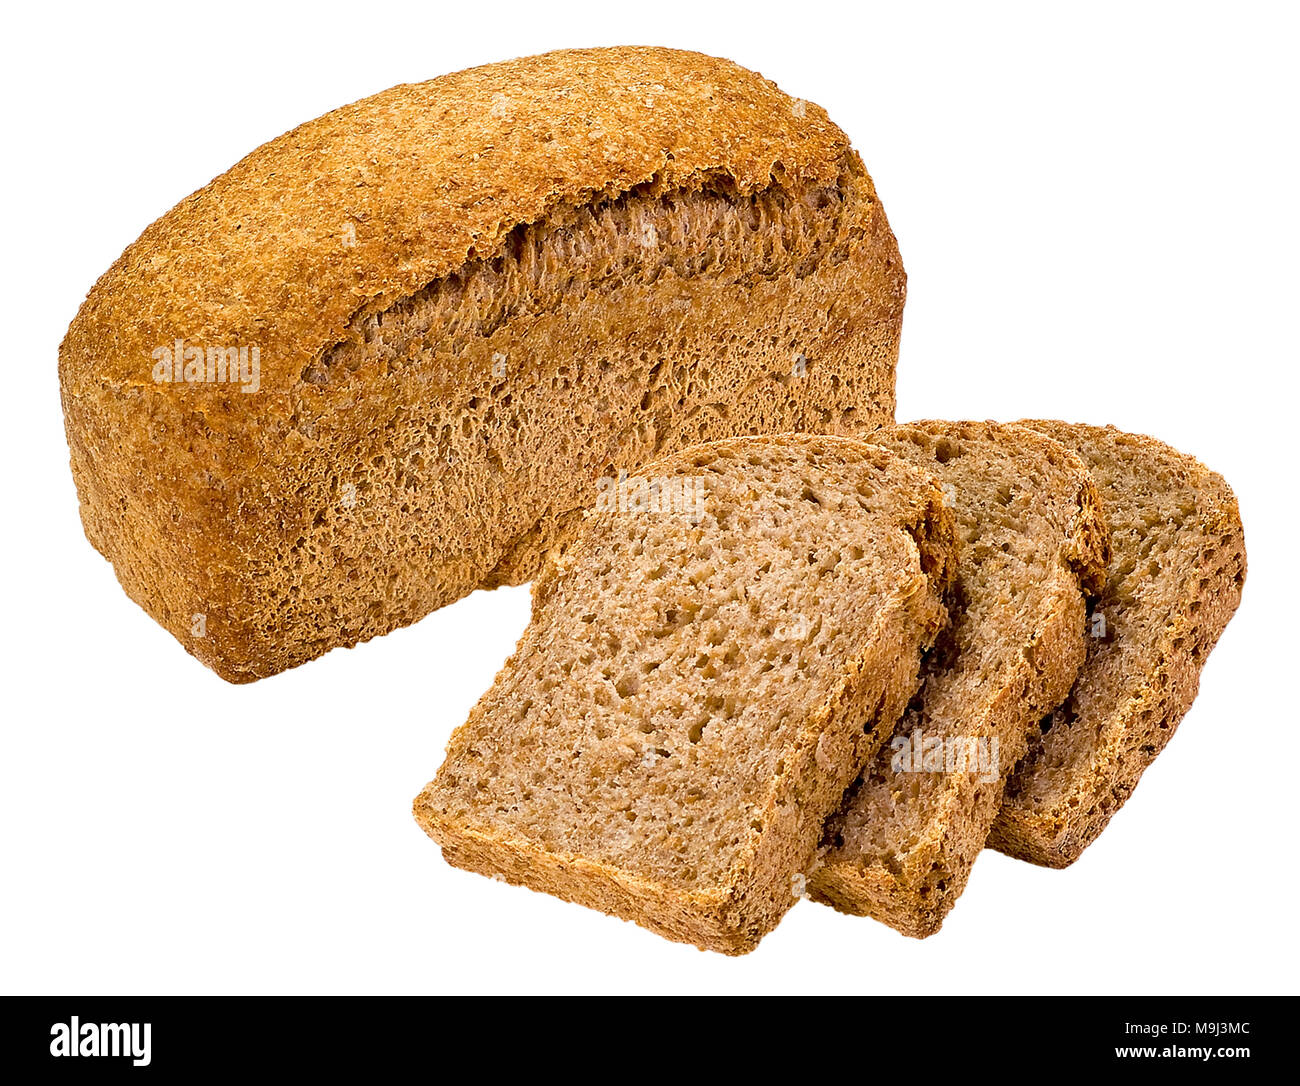 Loaf of Bread and slices Stock Photo